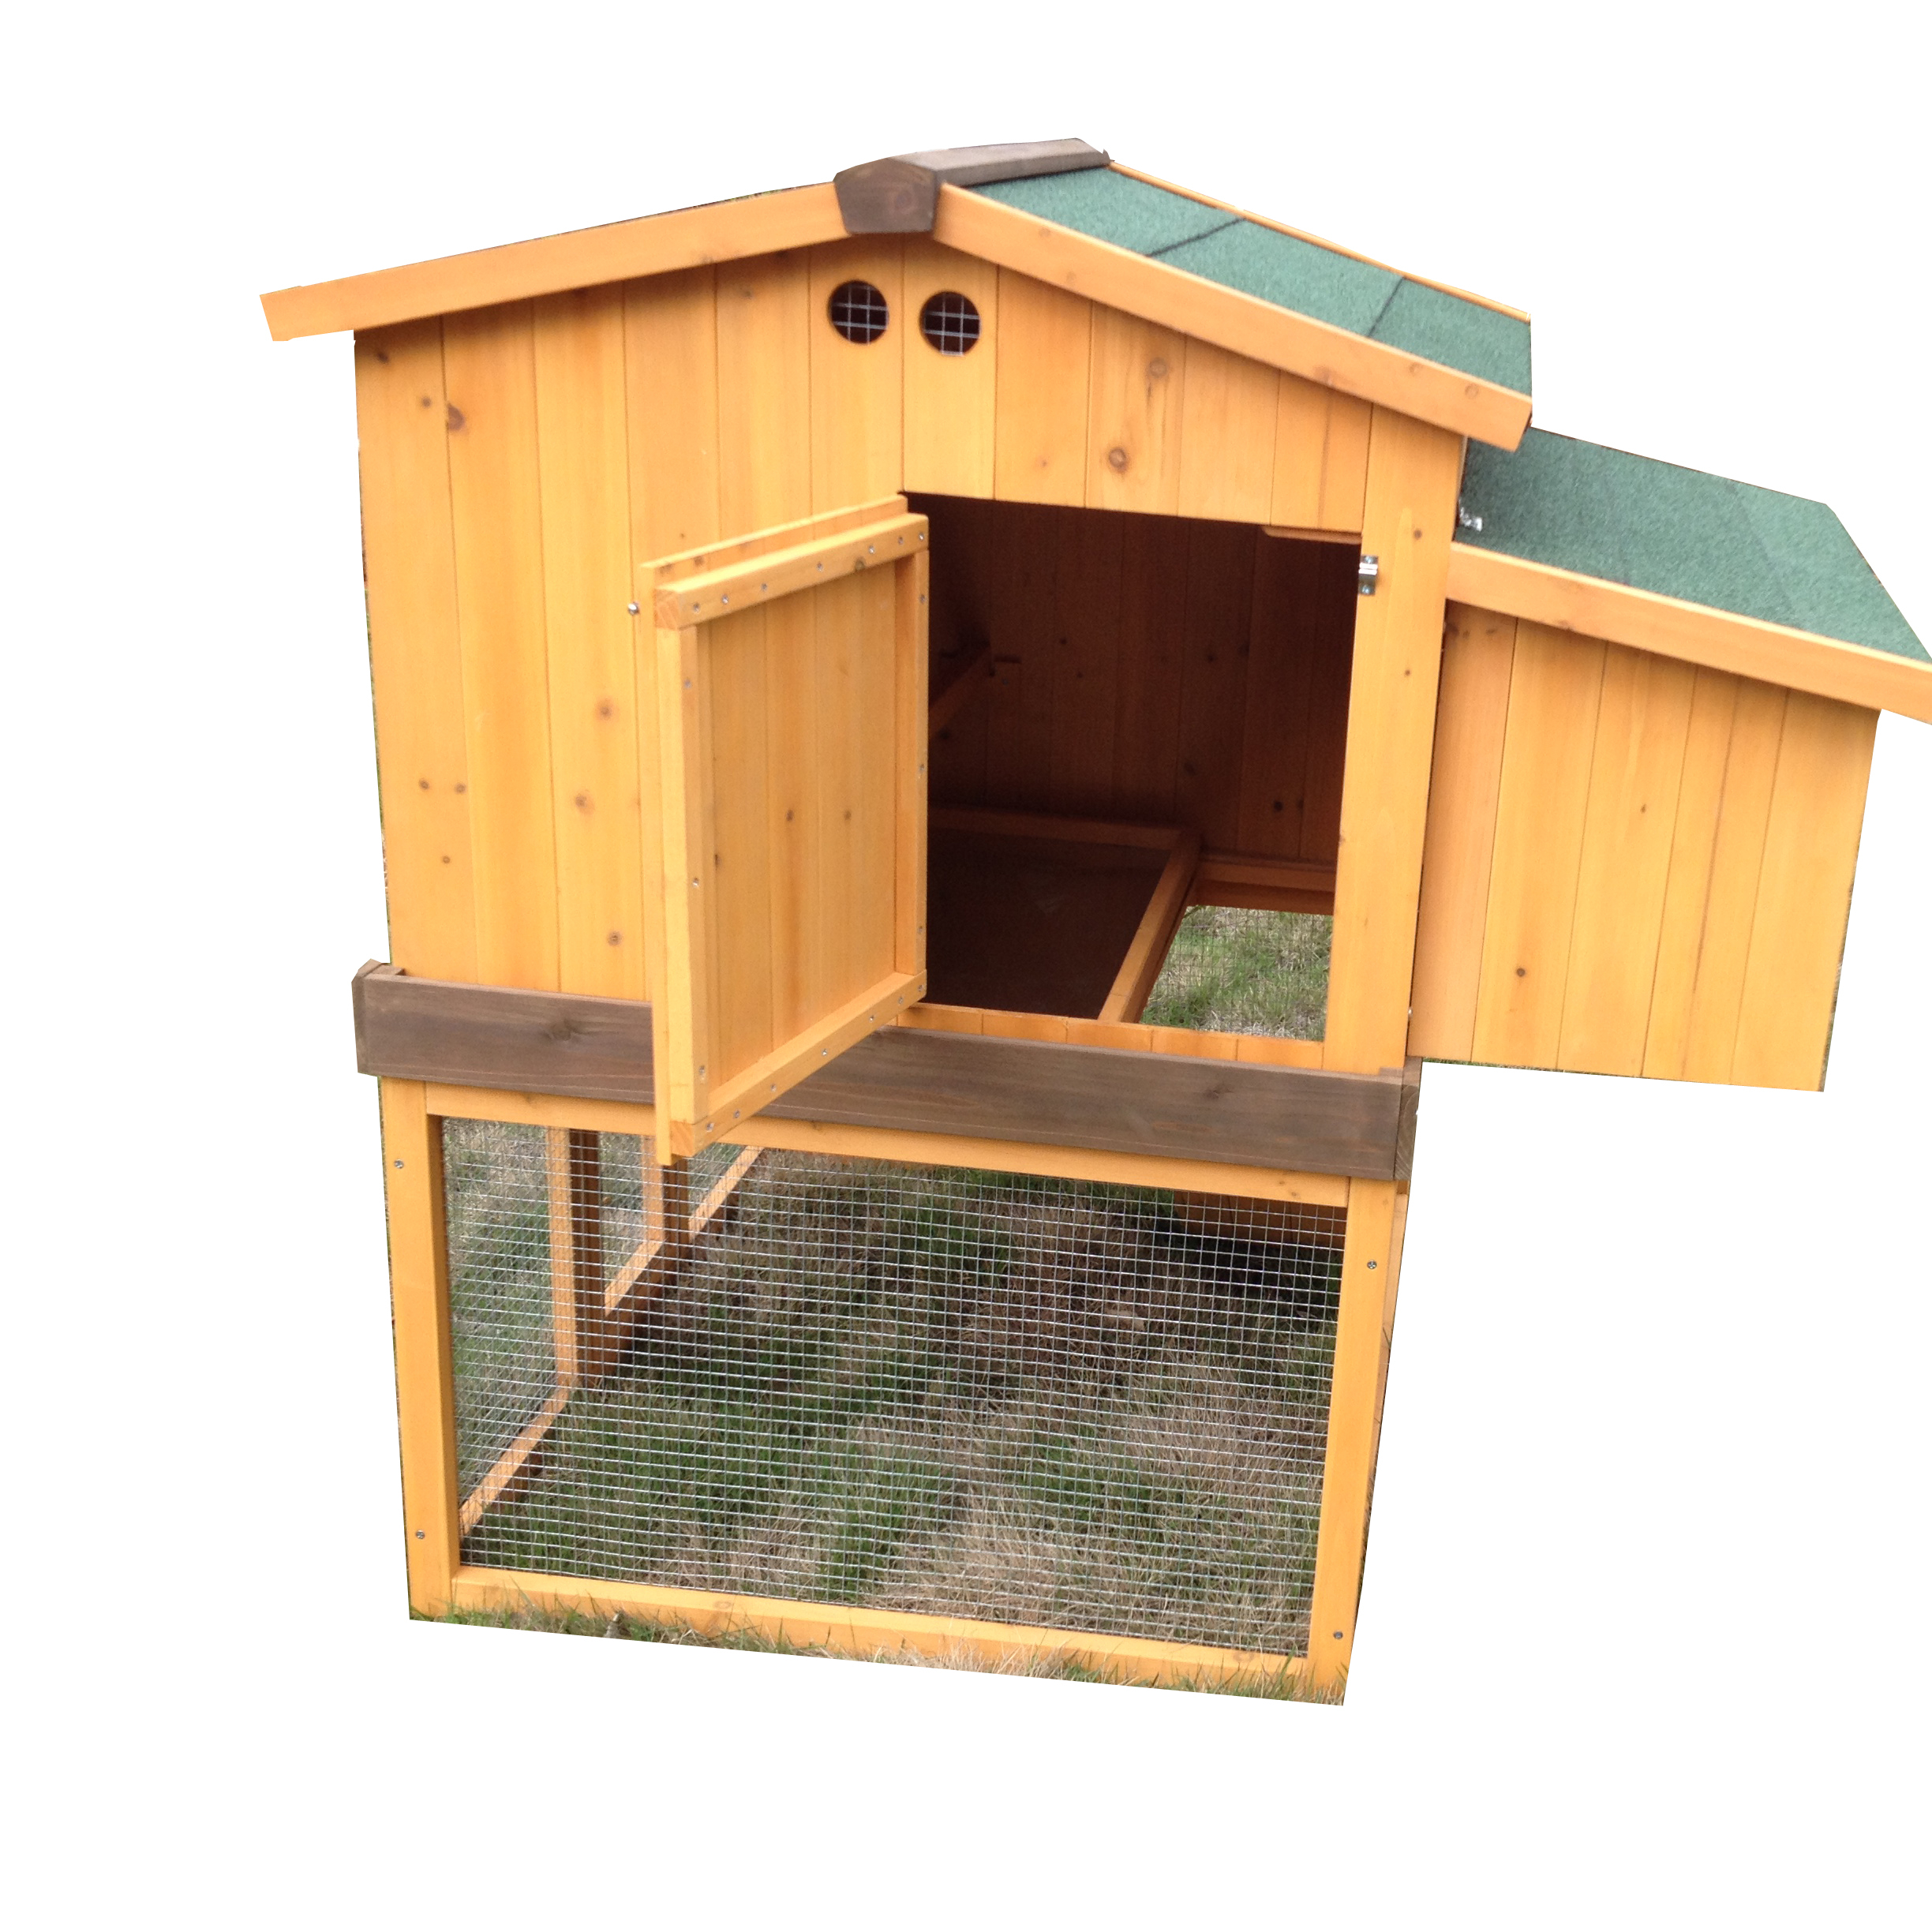 Wholesale Dealers of Round Wooden Planters -
 High Quality Flat Pack Wooden egg laying Chicken House coop – Easy